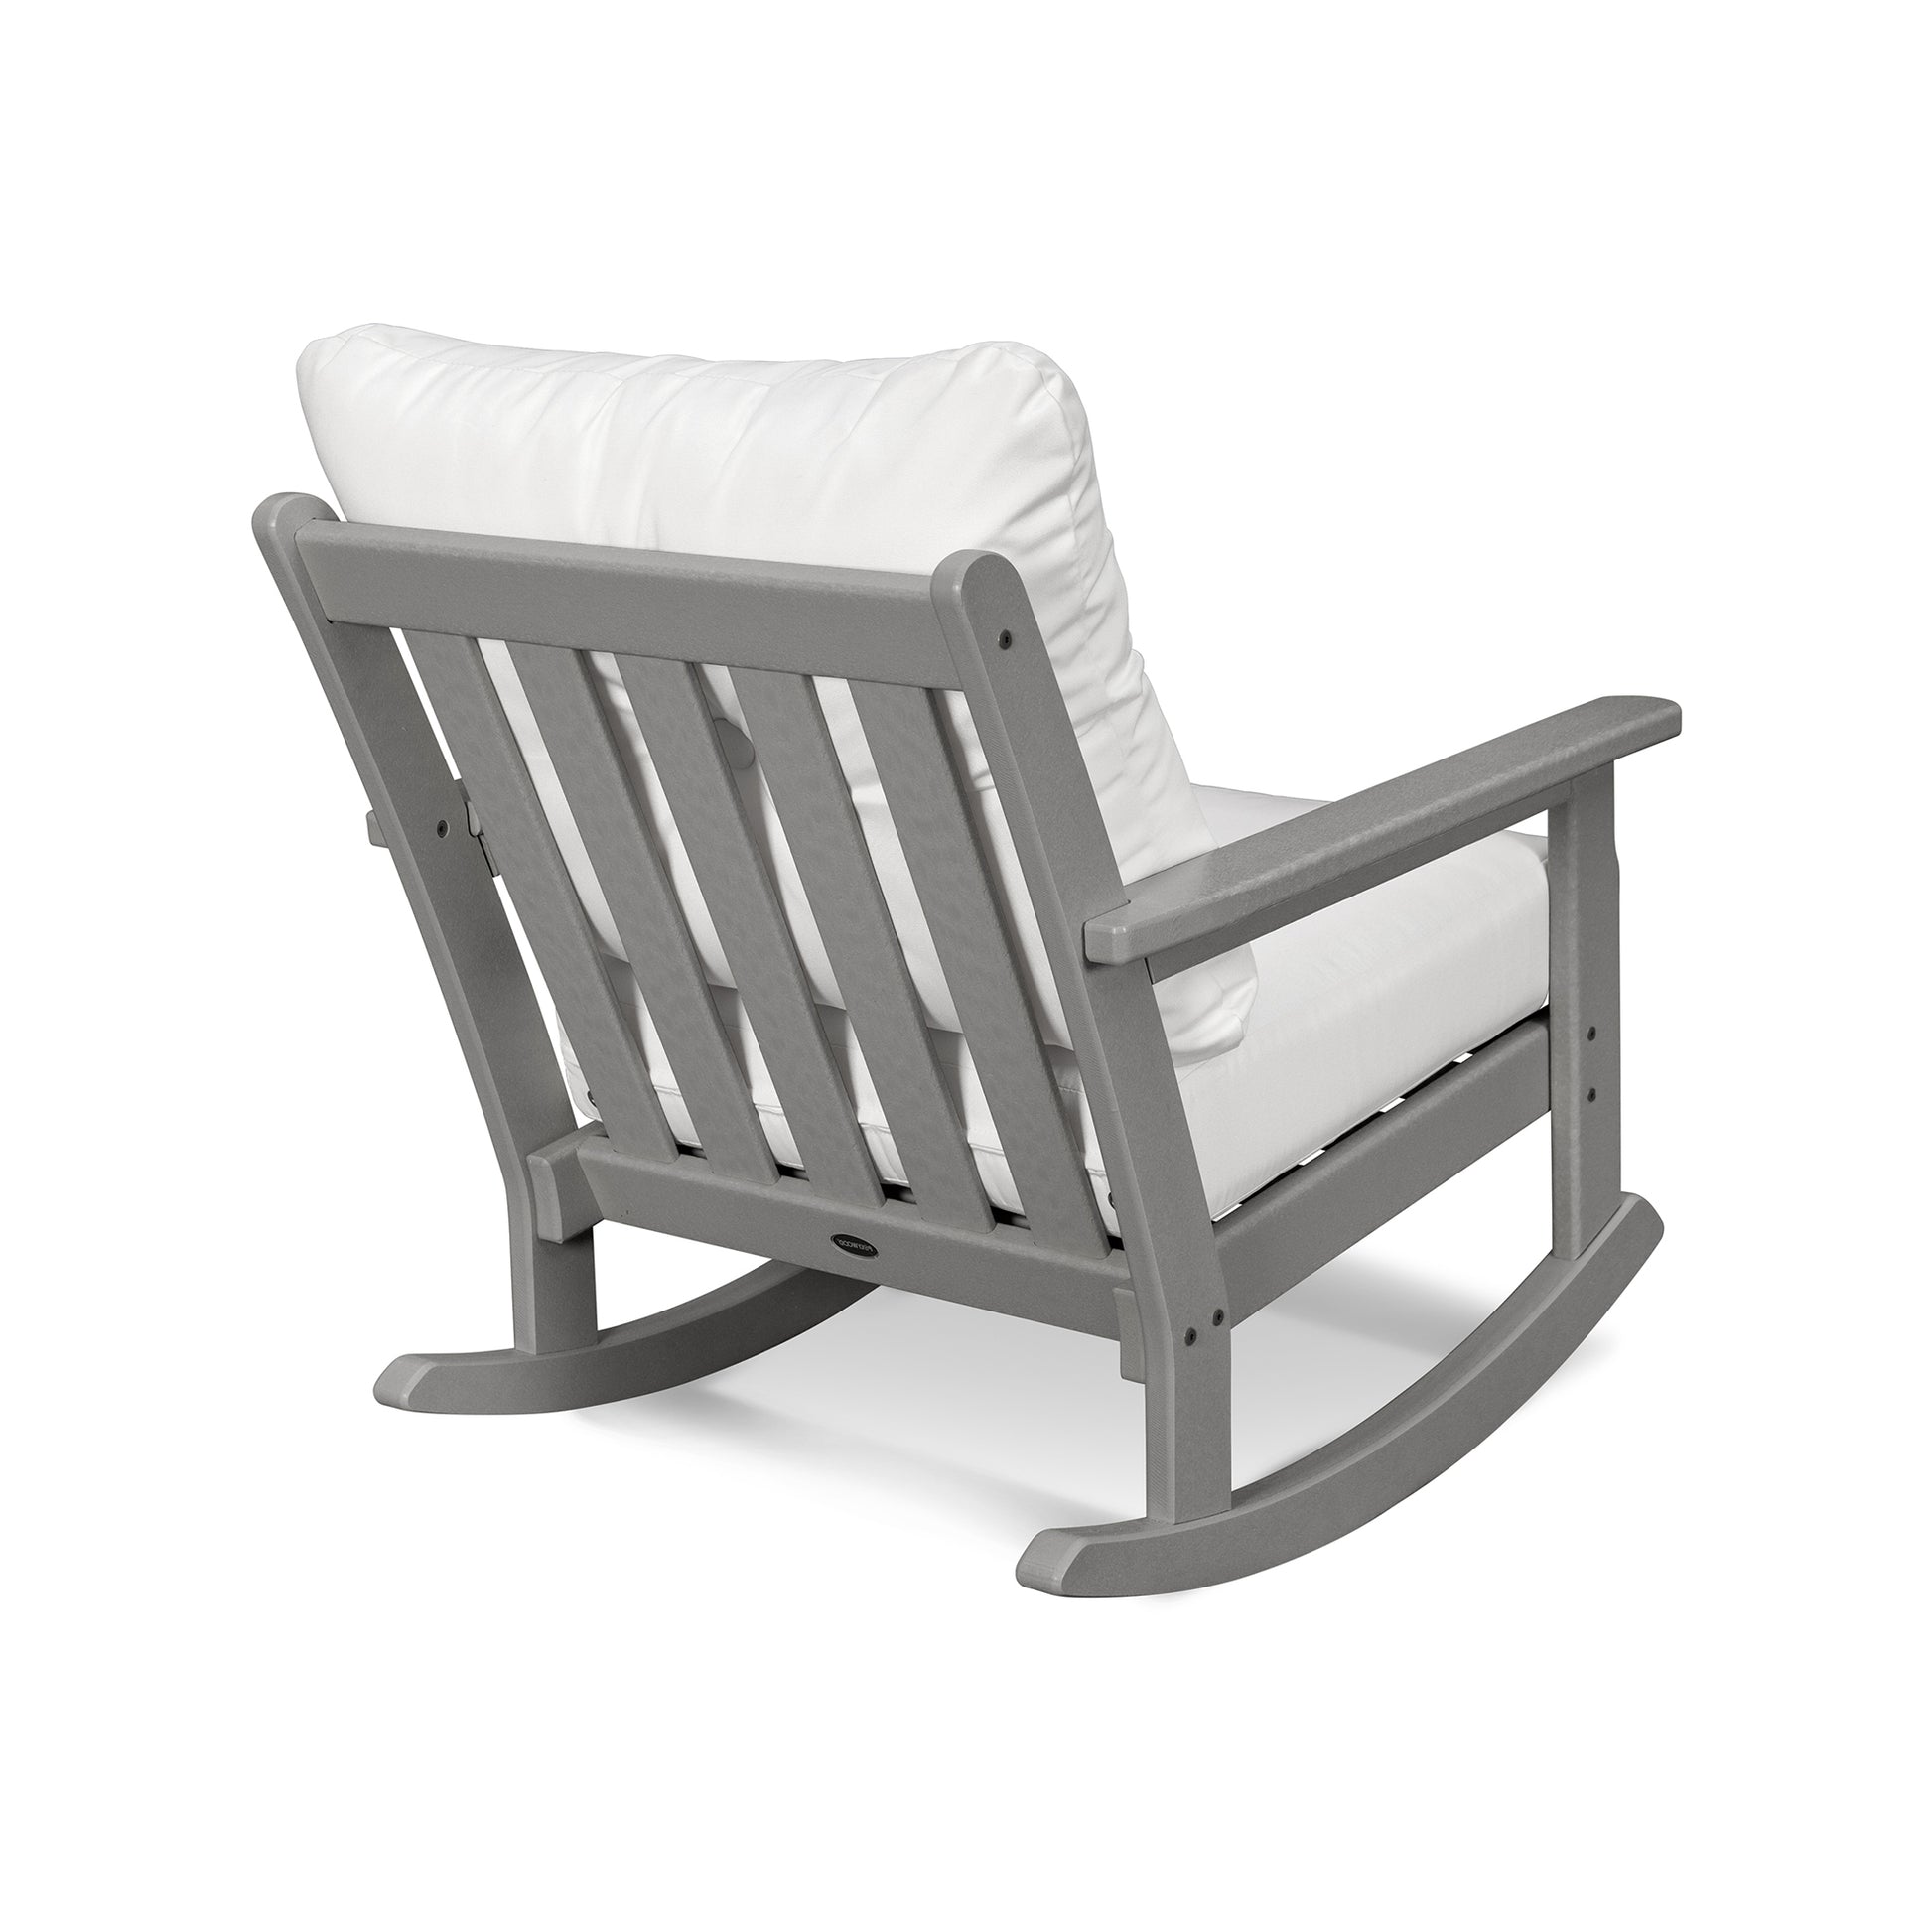 A gray POLYWOOD Vineyard Deep Seating Rocking Chair with a vertical slat back and seat design, featuring armrests and an all-weather fabric cushion on the backrest, isolated on